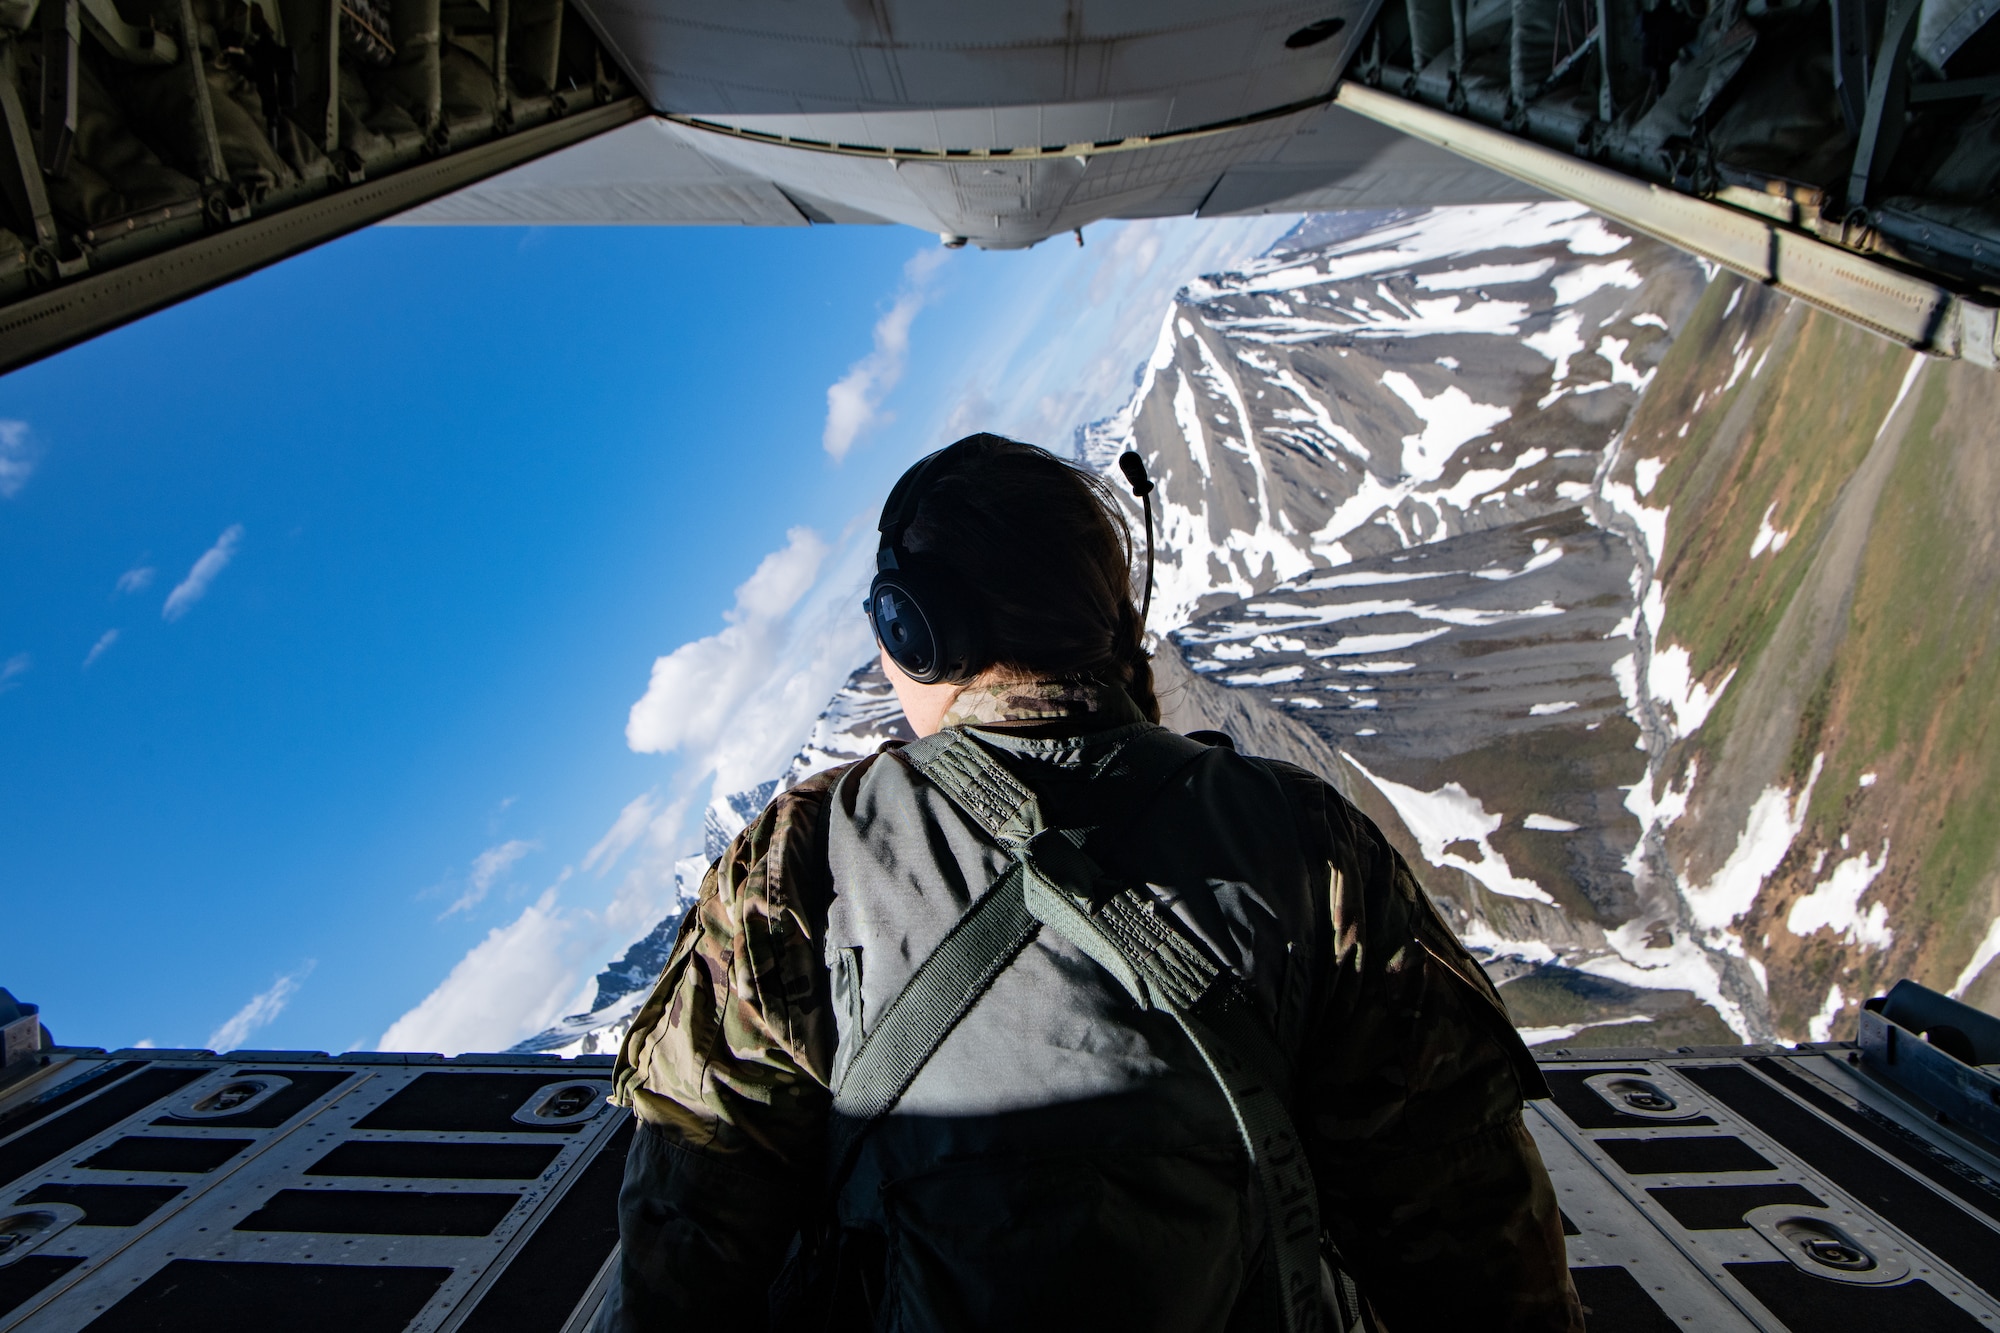 An Airman sits on the open ramp of a C-130 as it flies over mountains.